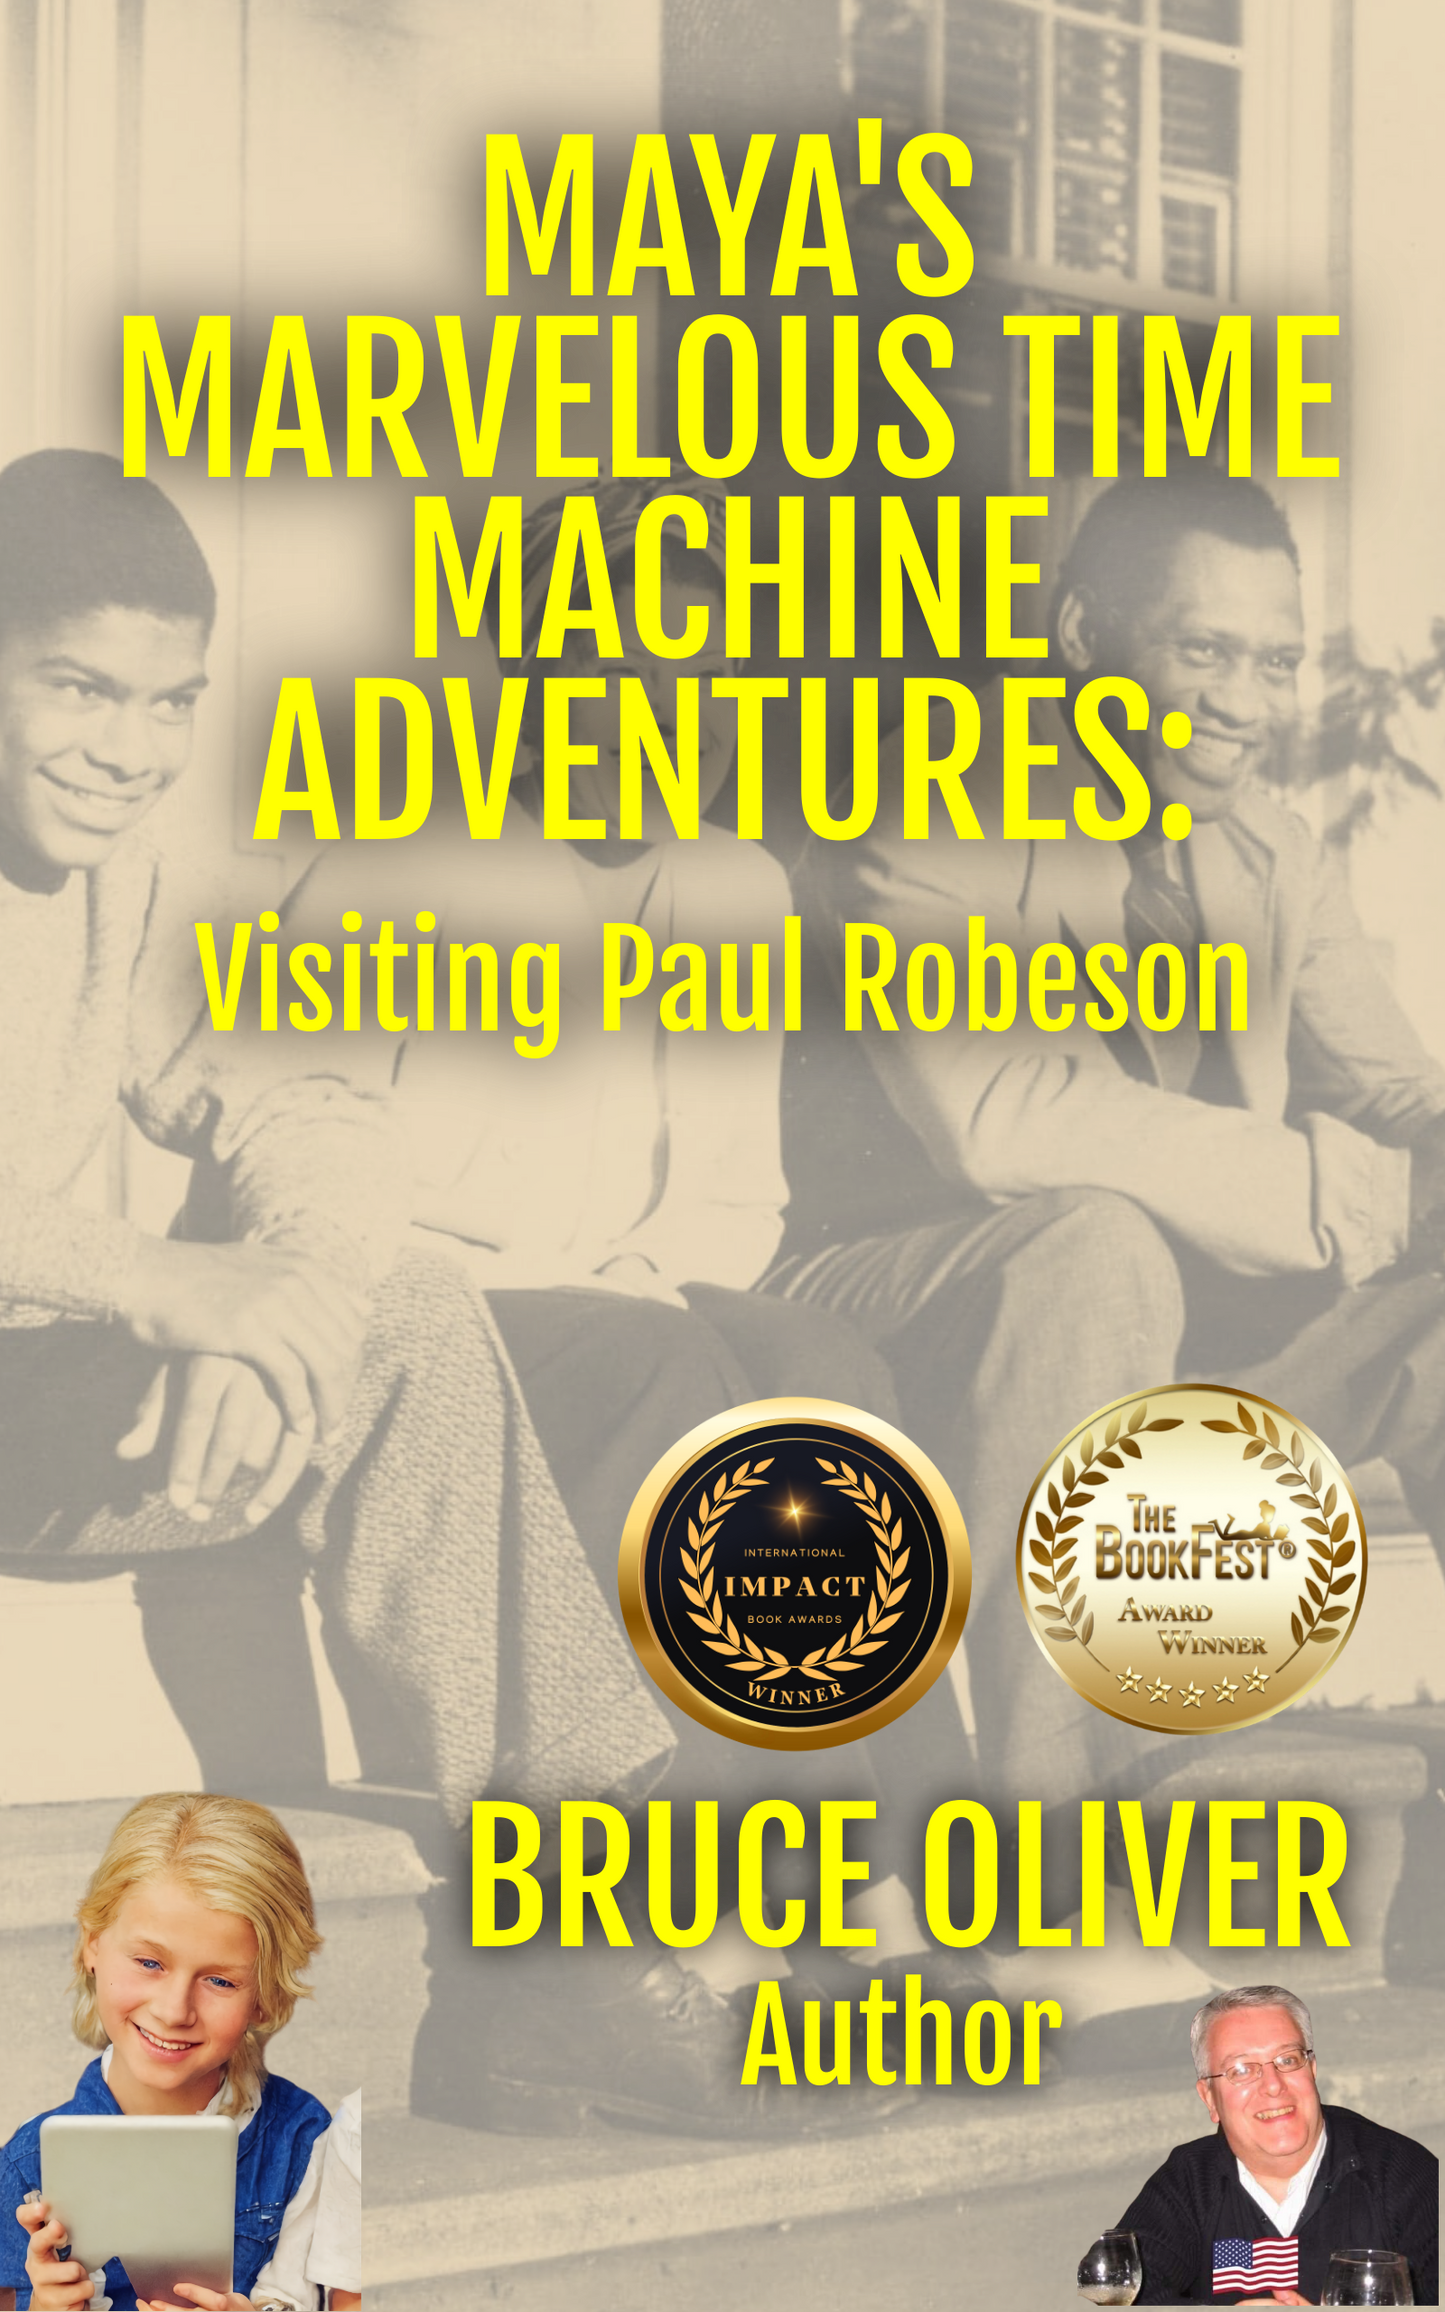 Maya's Marvelous Time Machine Adventures: Visiting Paul Robeson (PDF only)